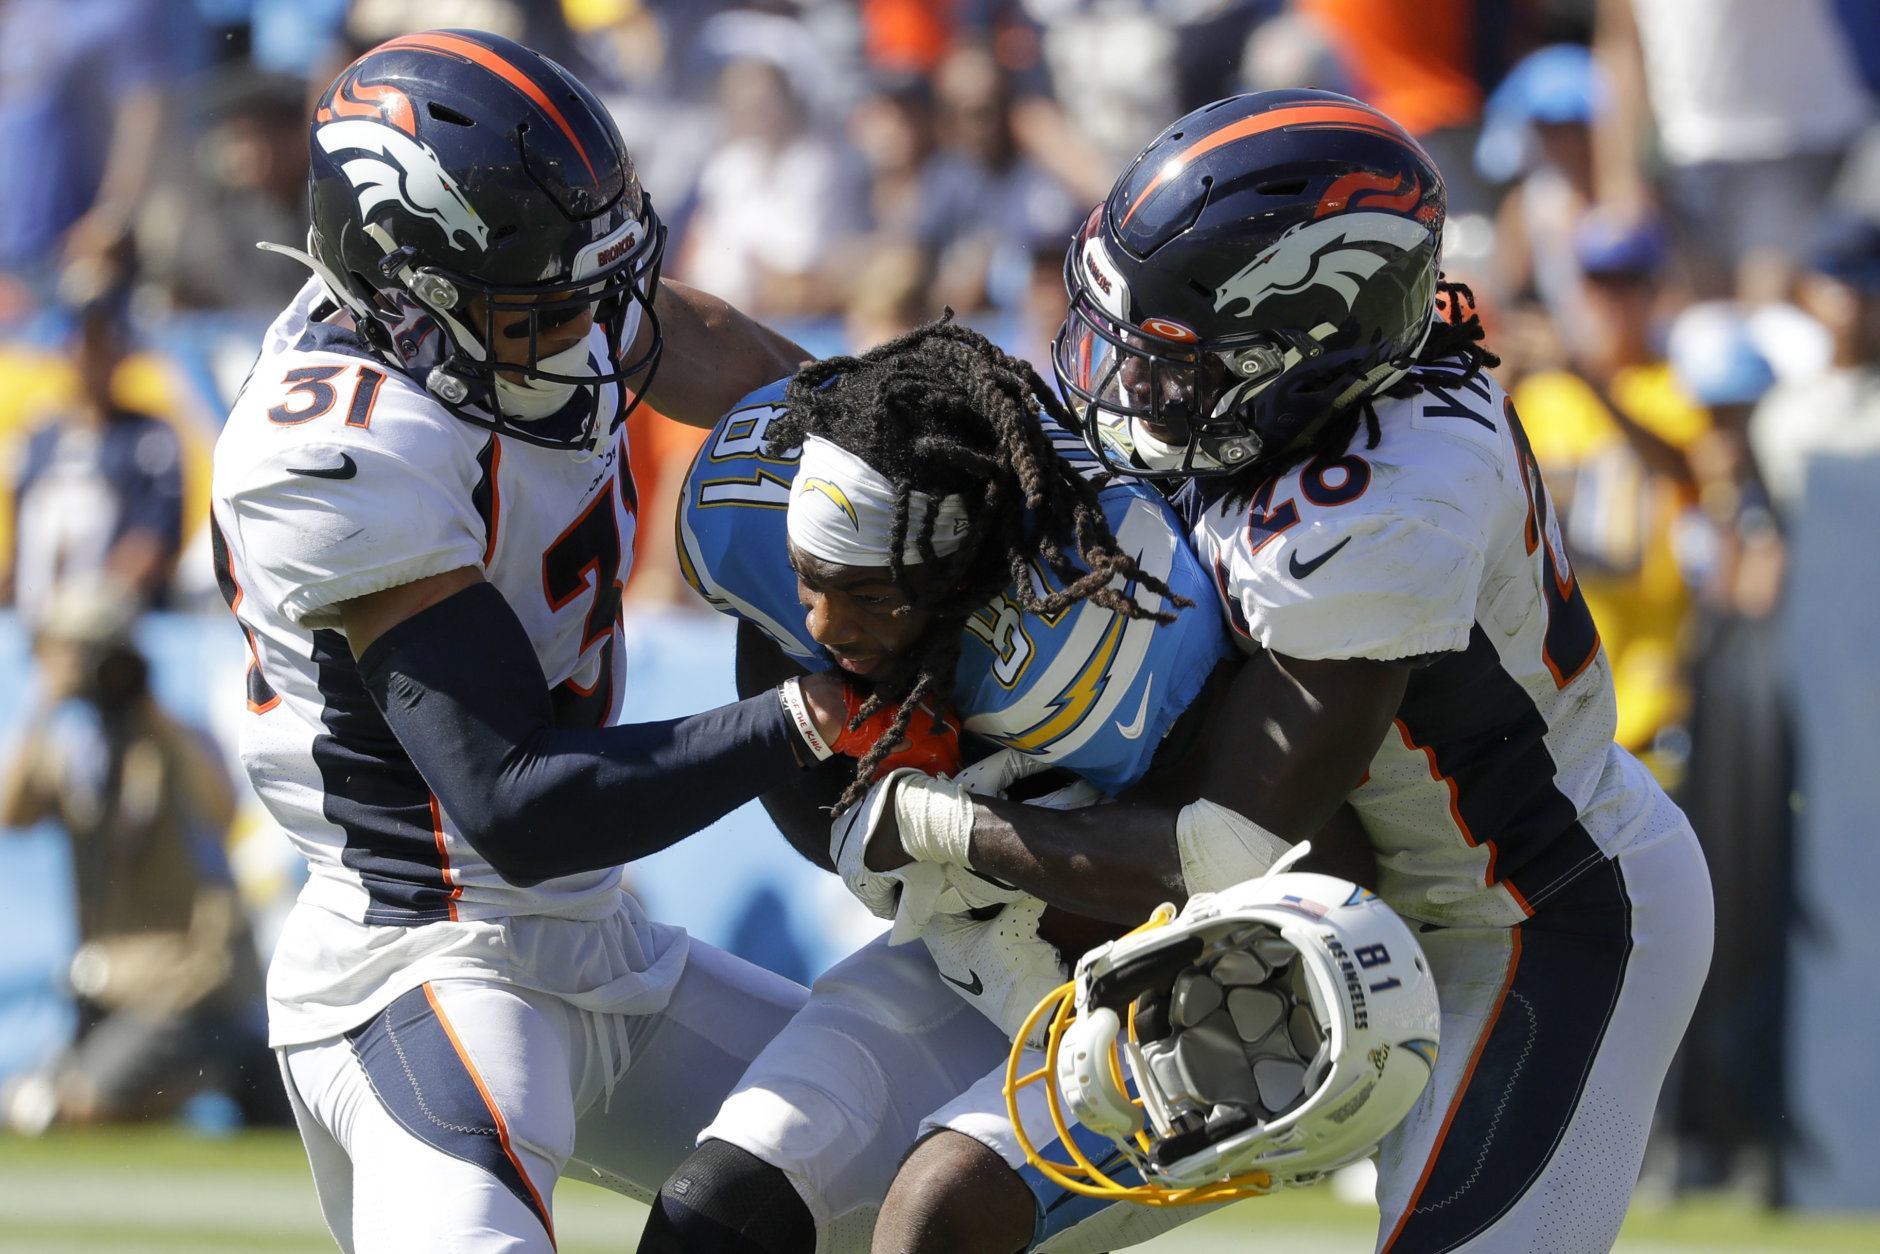 <p><b><i>Broncos 20</i></b><br />
<b><i>Chargers 13</i></b></p>
<p>Denver got its first takeaway and its first win. For a team with Joe Flacco at QB, those aren&#8217;t mutually exclusive.</p>
